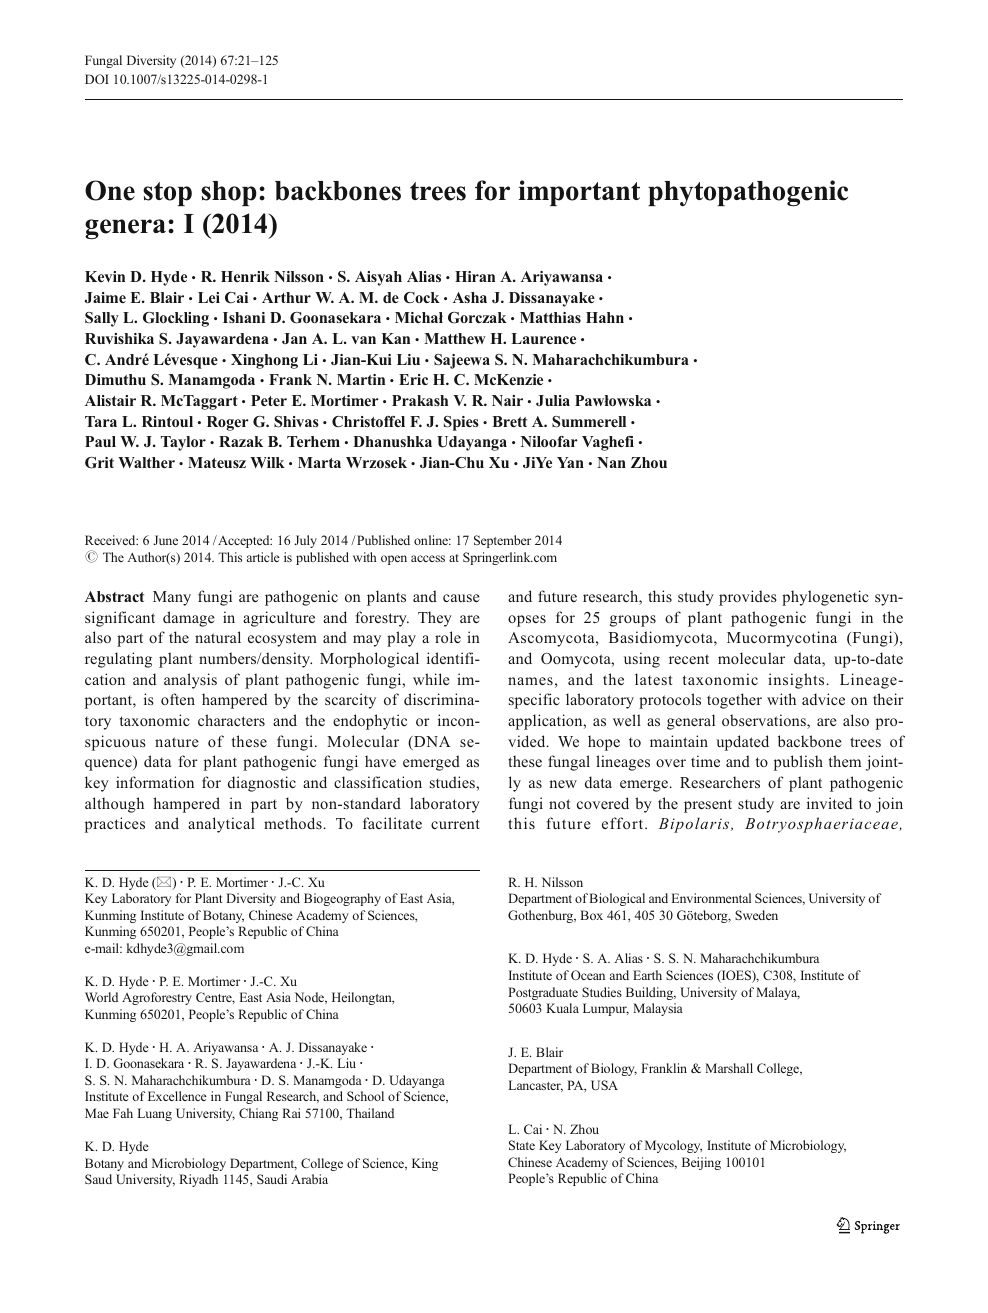 One Stop Shop Backbones Trees For Important Phytopathogenic